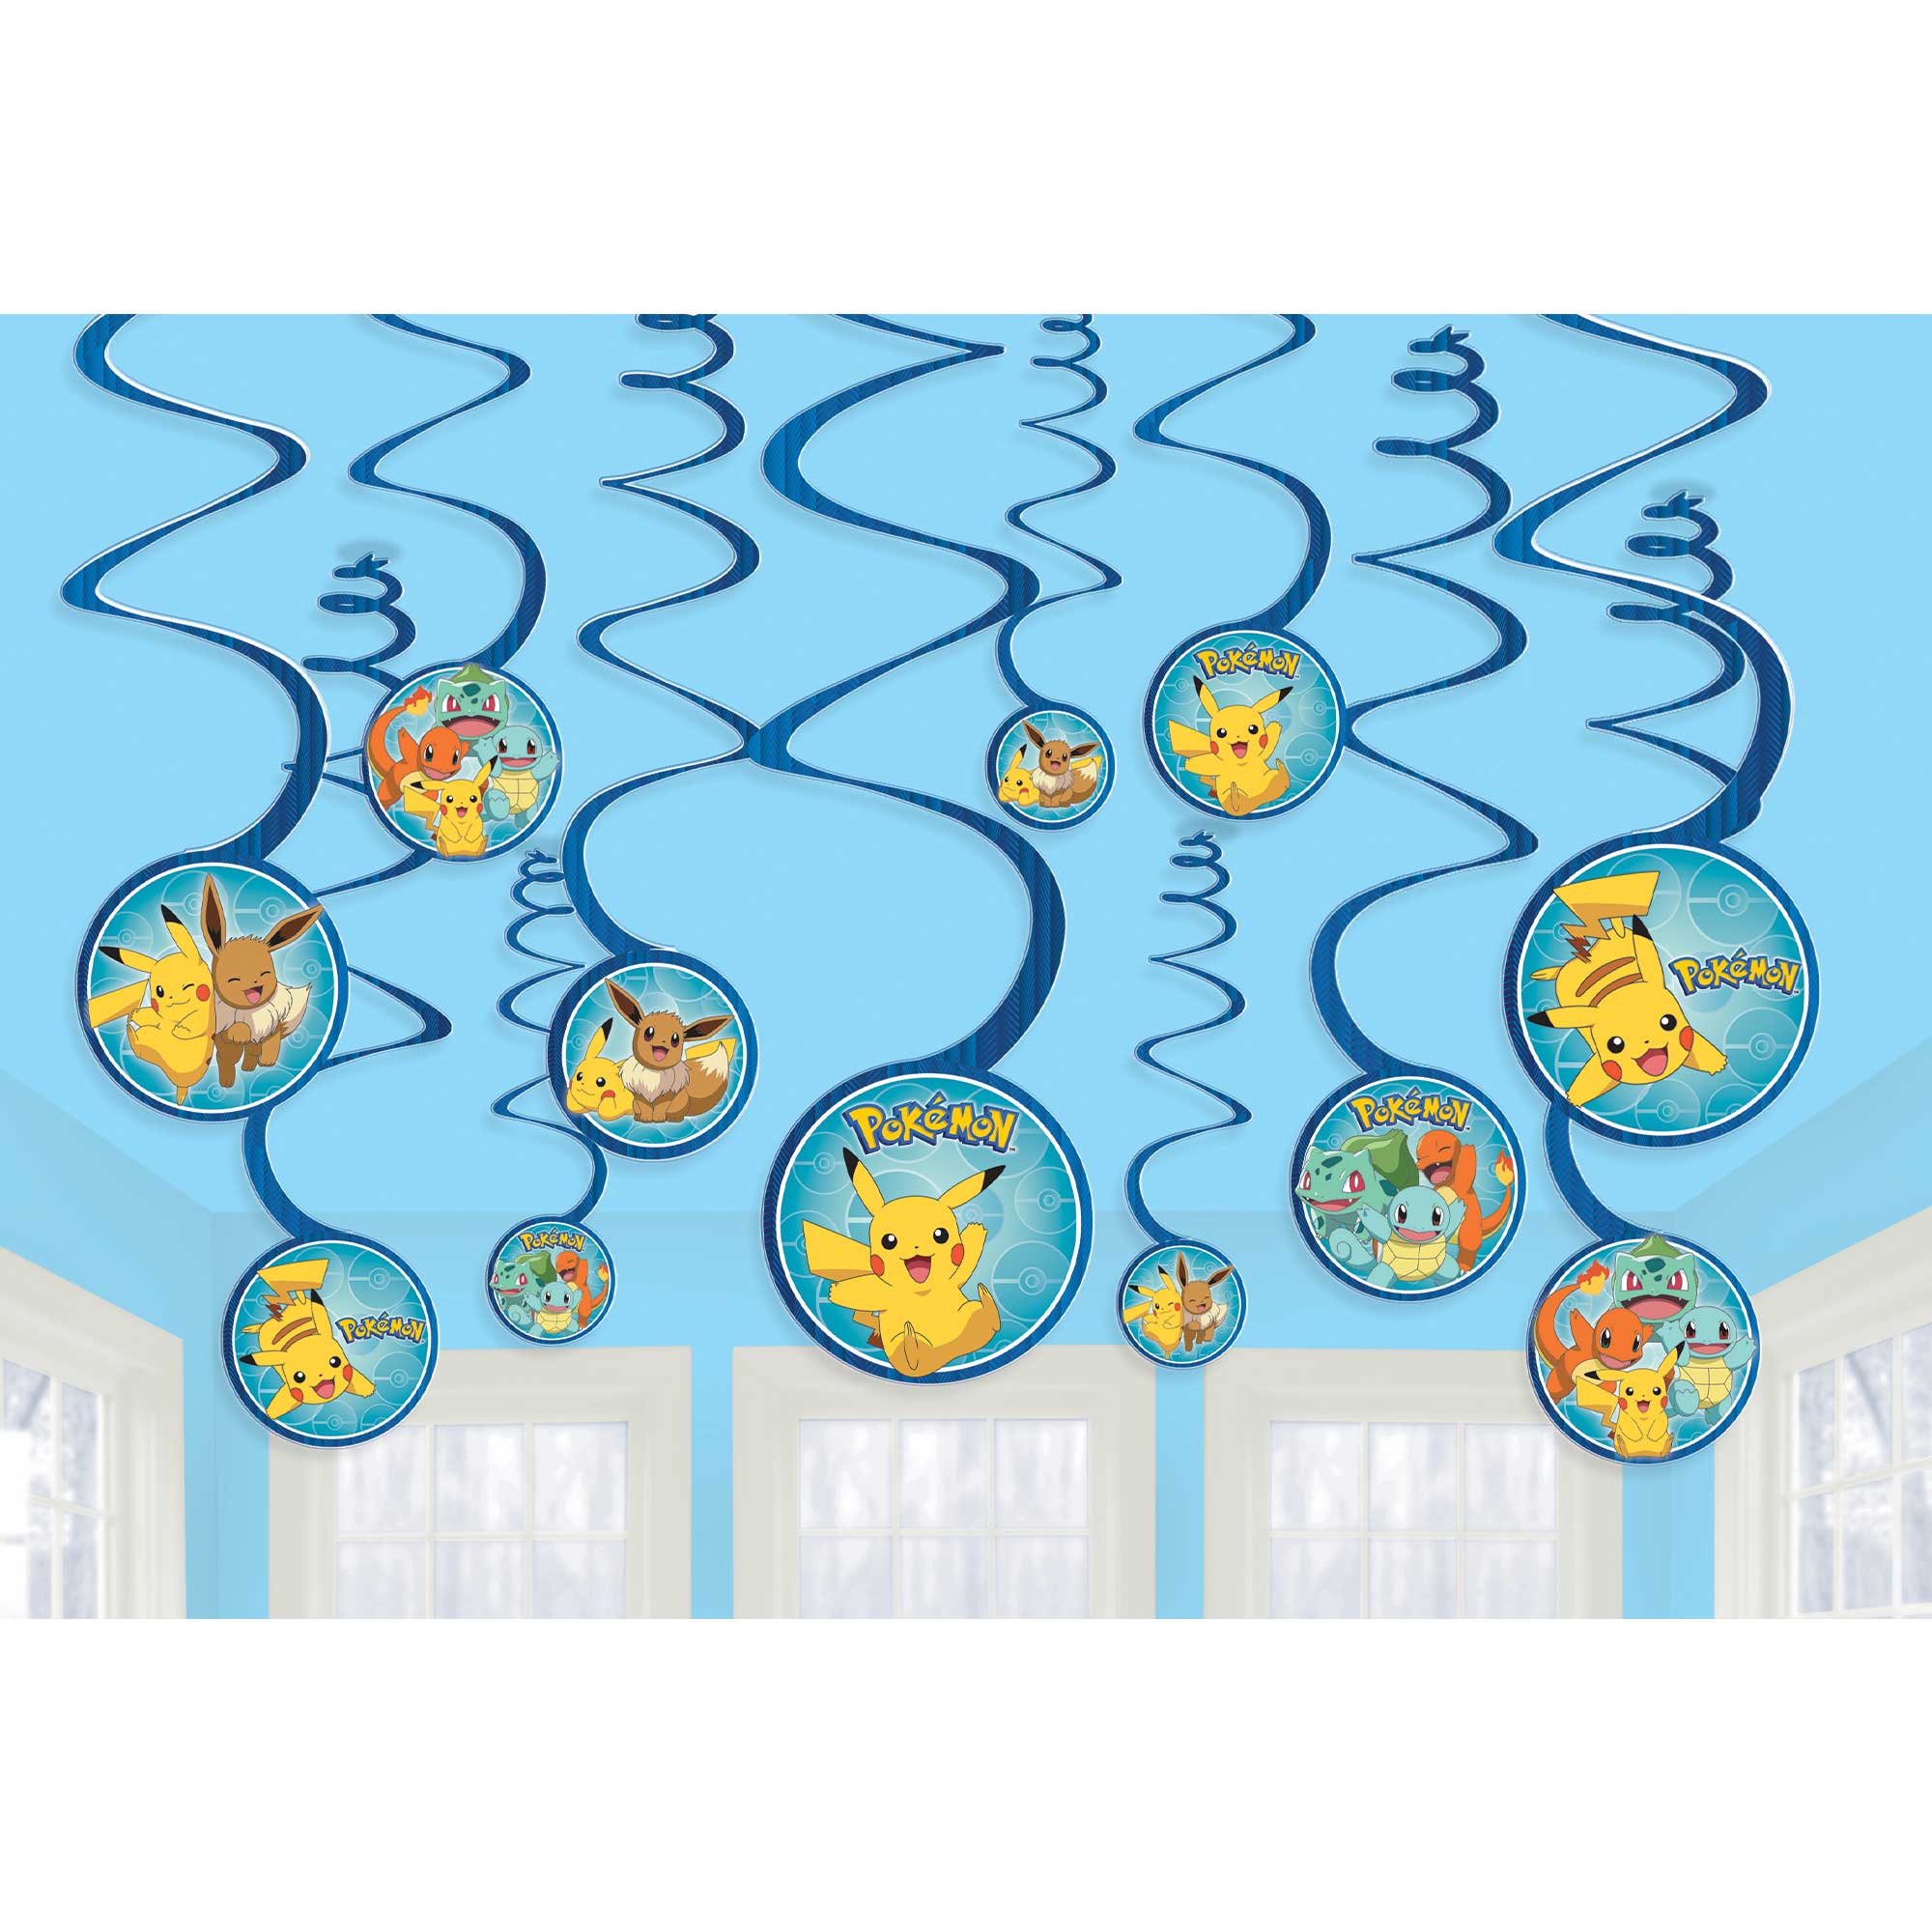 Pokemon Classic Spiral Decorations with Cutouts - 12 Pack Default Title